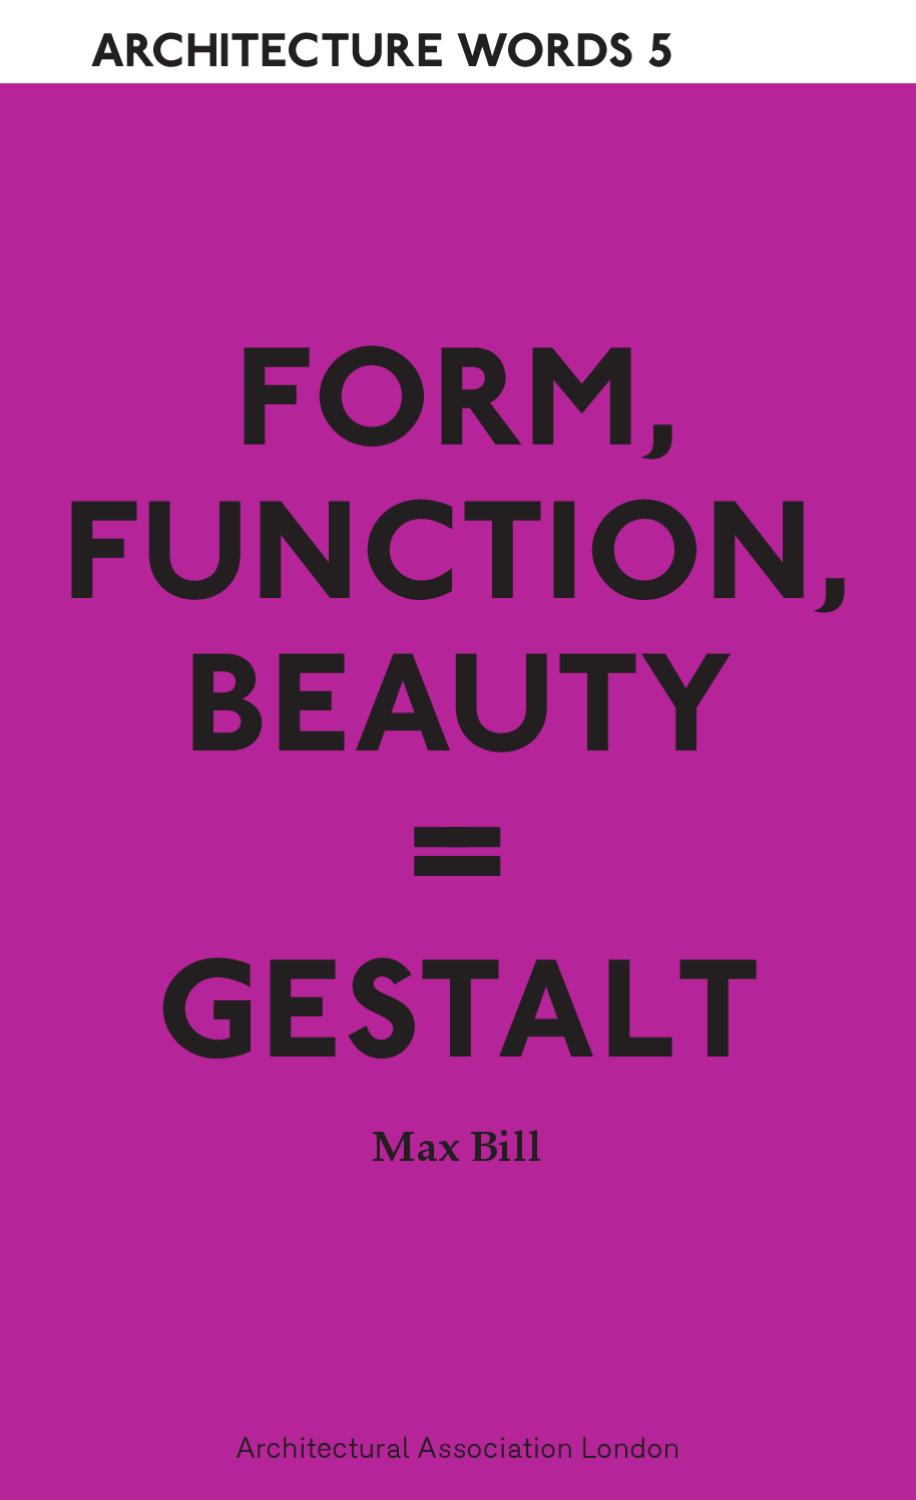 Architecture Words 5: Form, Function, Beauty, Max Bill